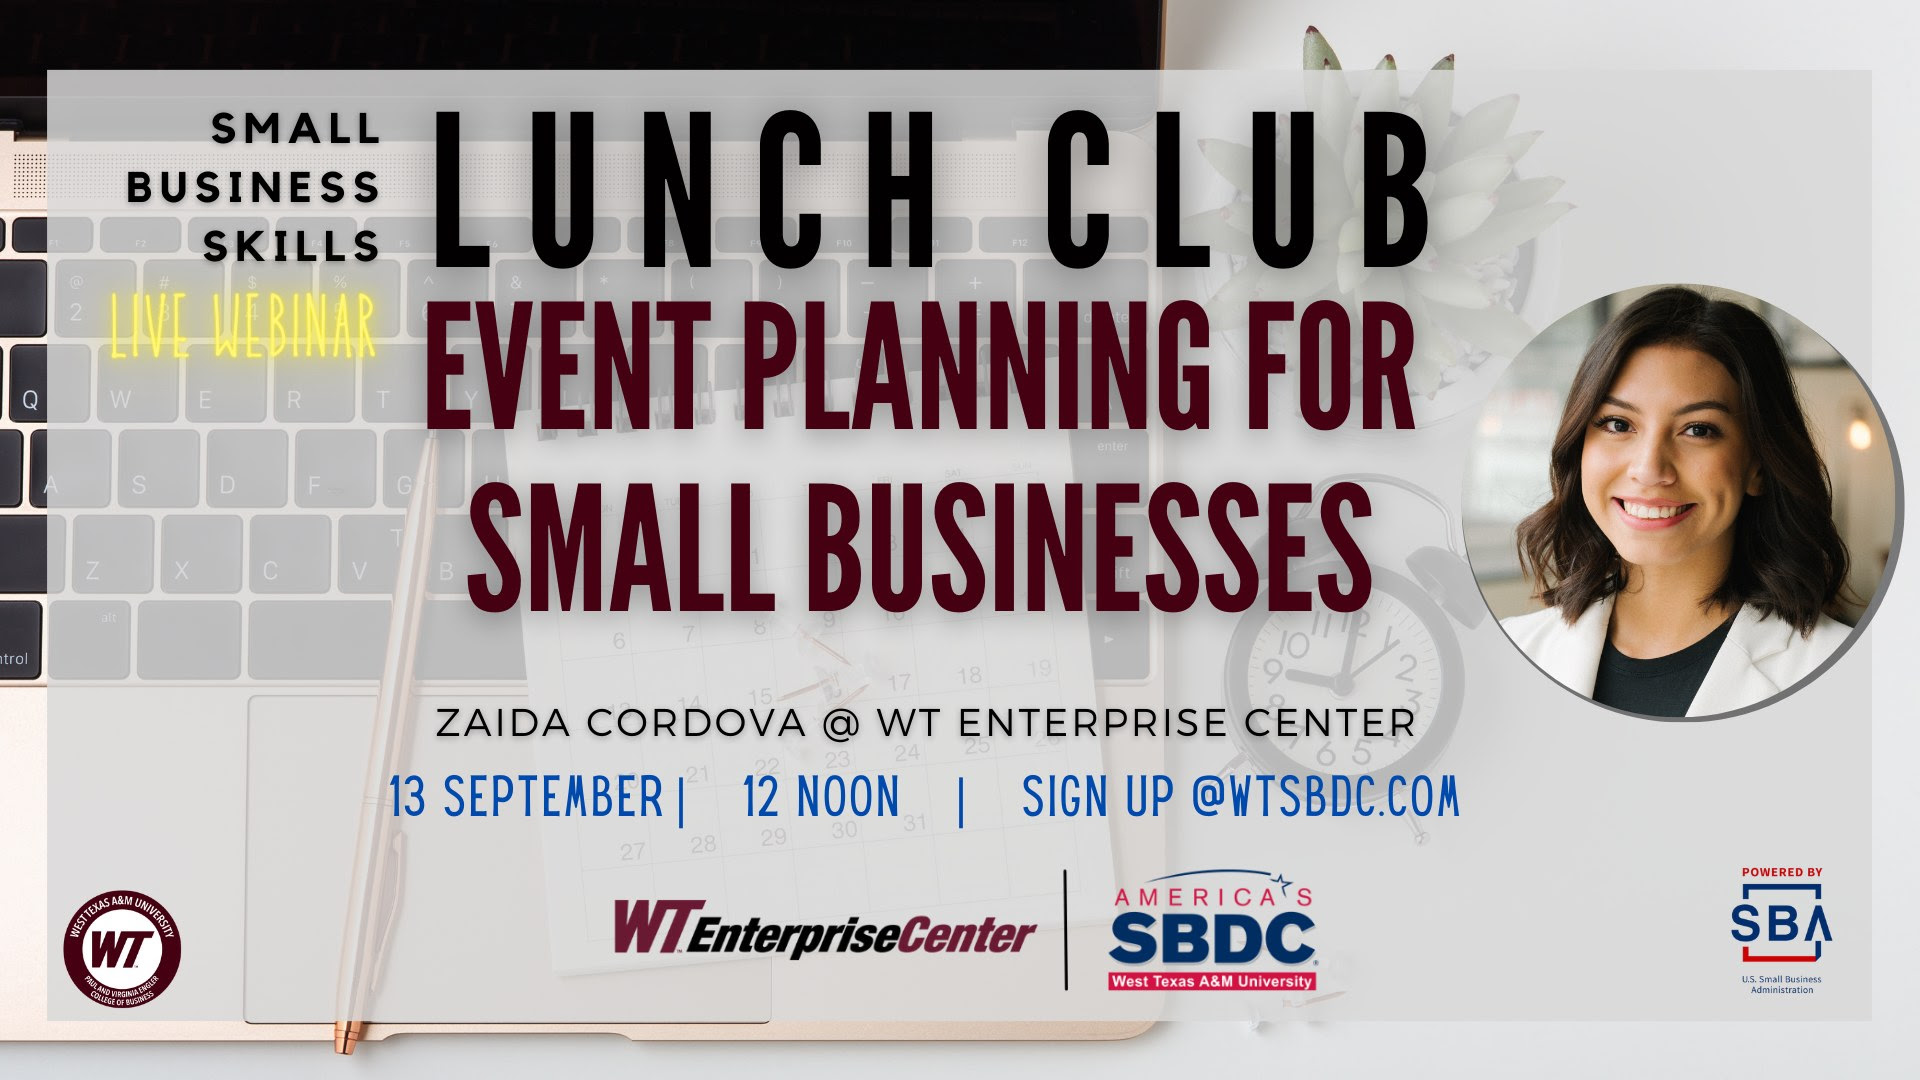 Lunch Club Event Planning for Small Businesses @ Lunch Club Event Planning for Small Businesses